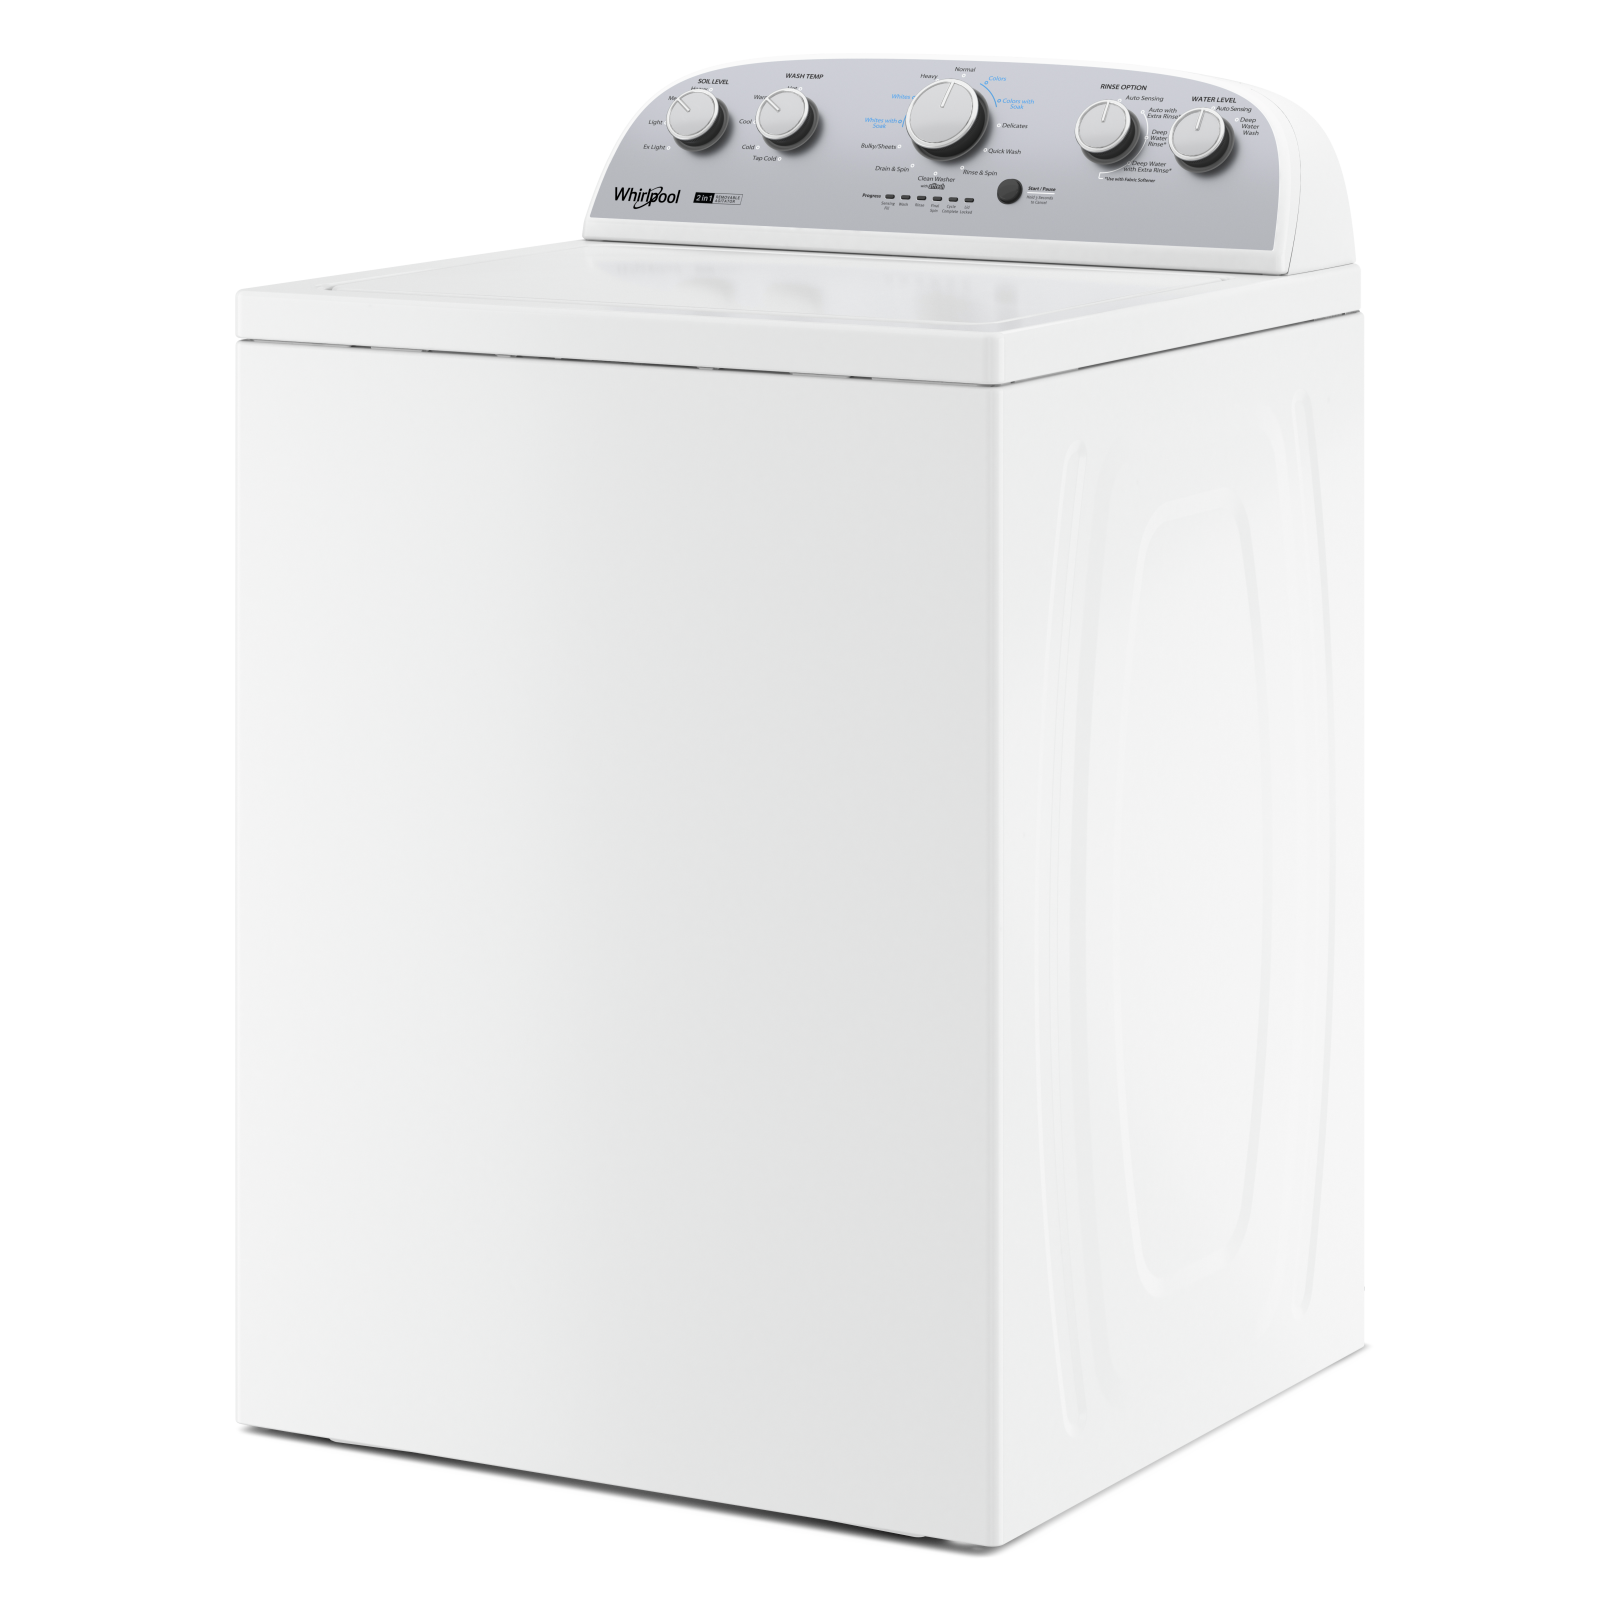 Whirlpool - 4.5 cu. Ft  Top Load Washer in White - WTW4957PW